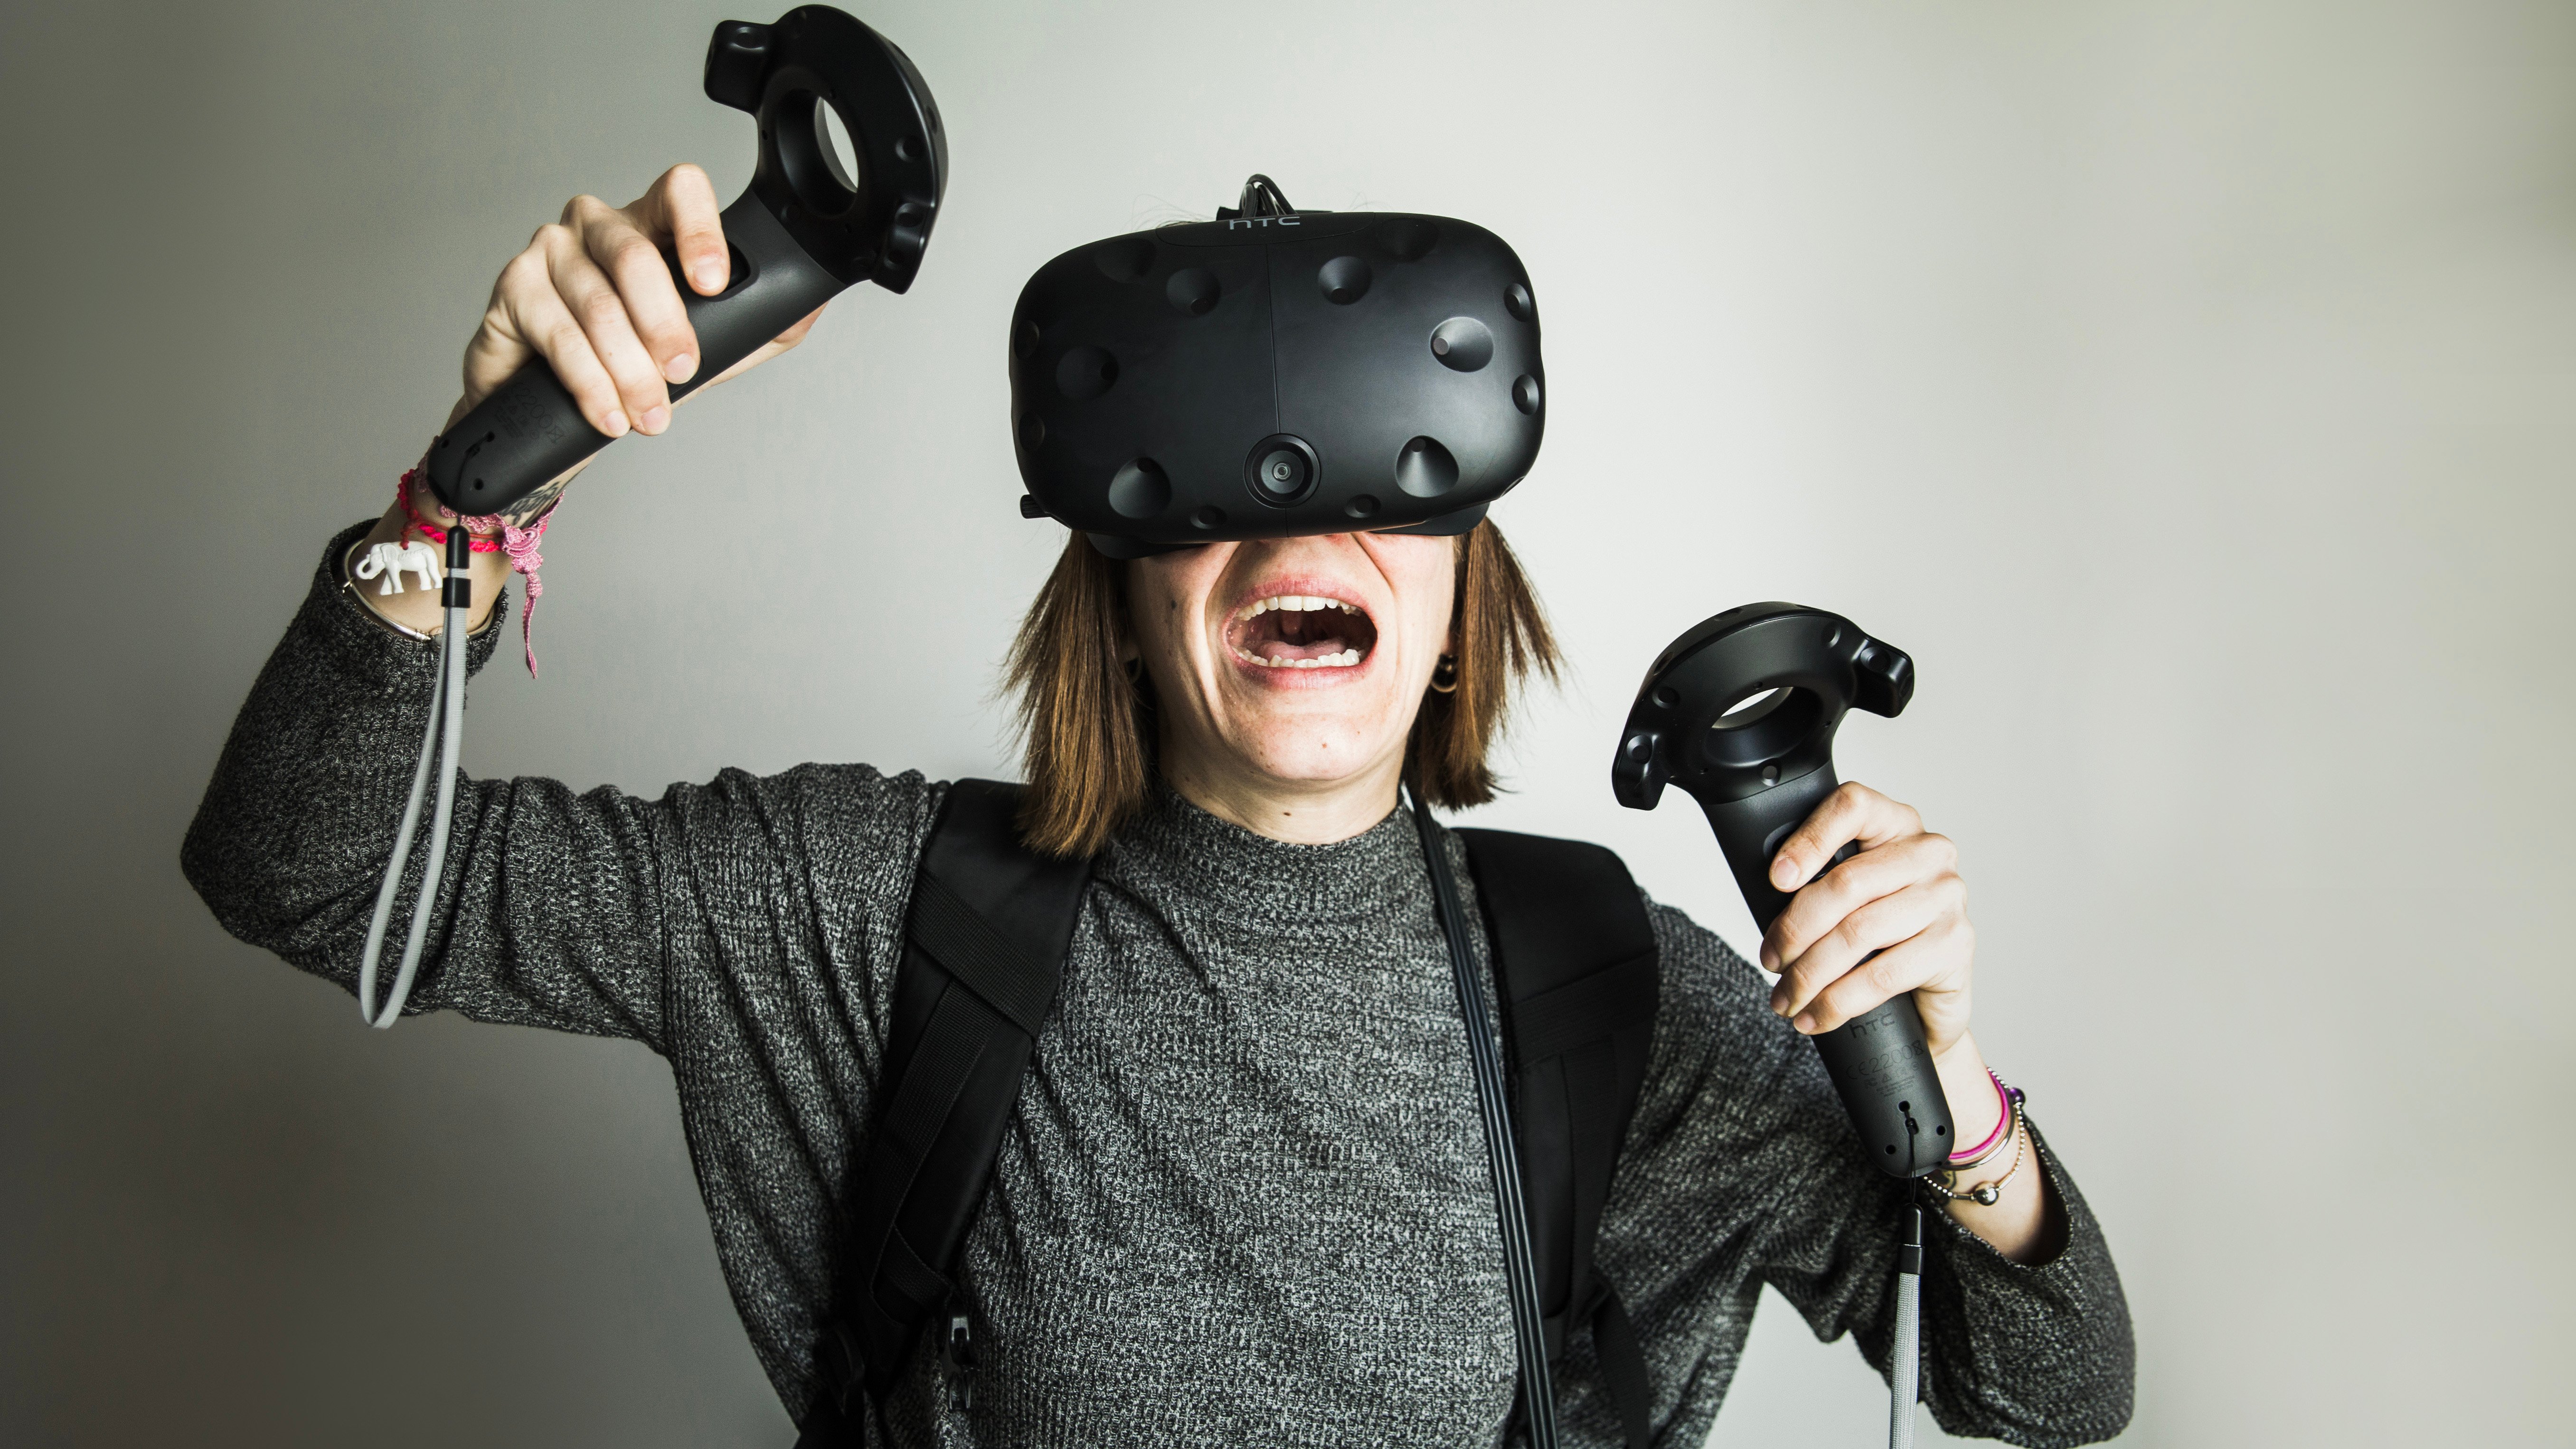 AndroidPIT htc vive hands on 3586 Virtual Reality Explained: Dedicated Headsets